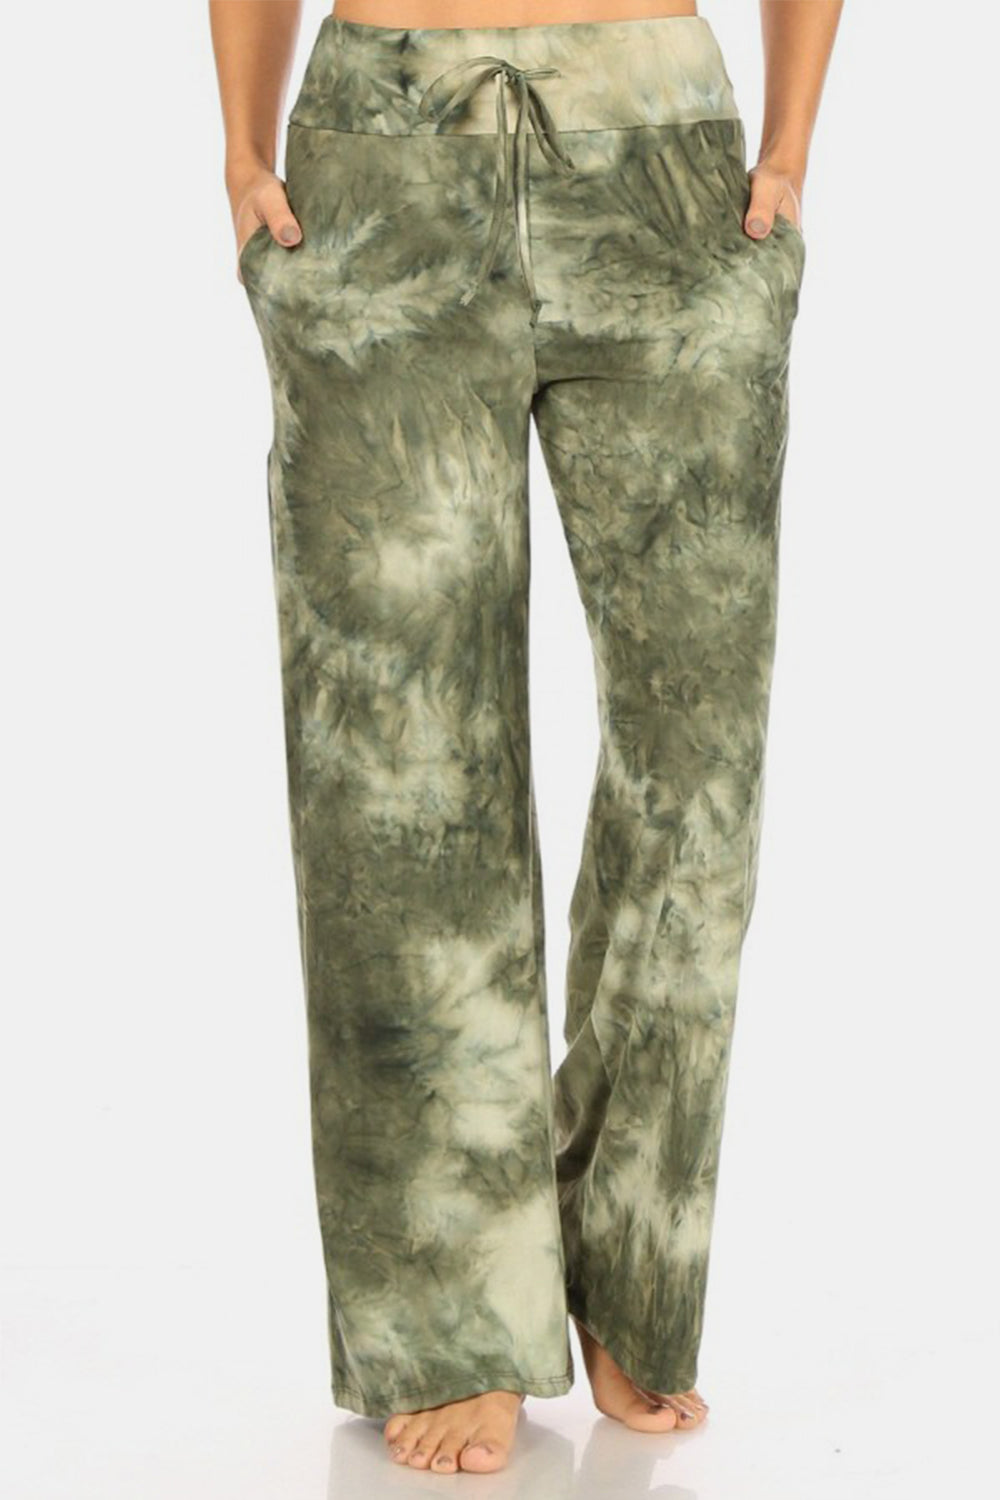 Light Gray Leggings Depot Buttery Soft Printed Drawstring Pants Sentient Beauty Fashions Apparel & Accessories